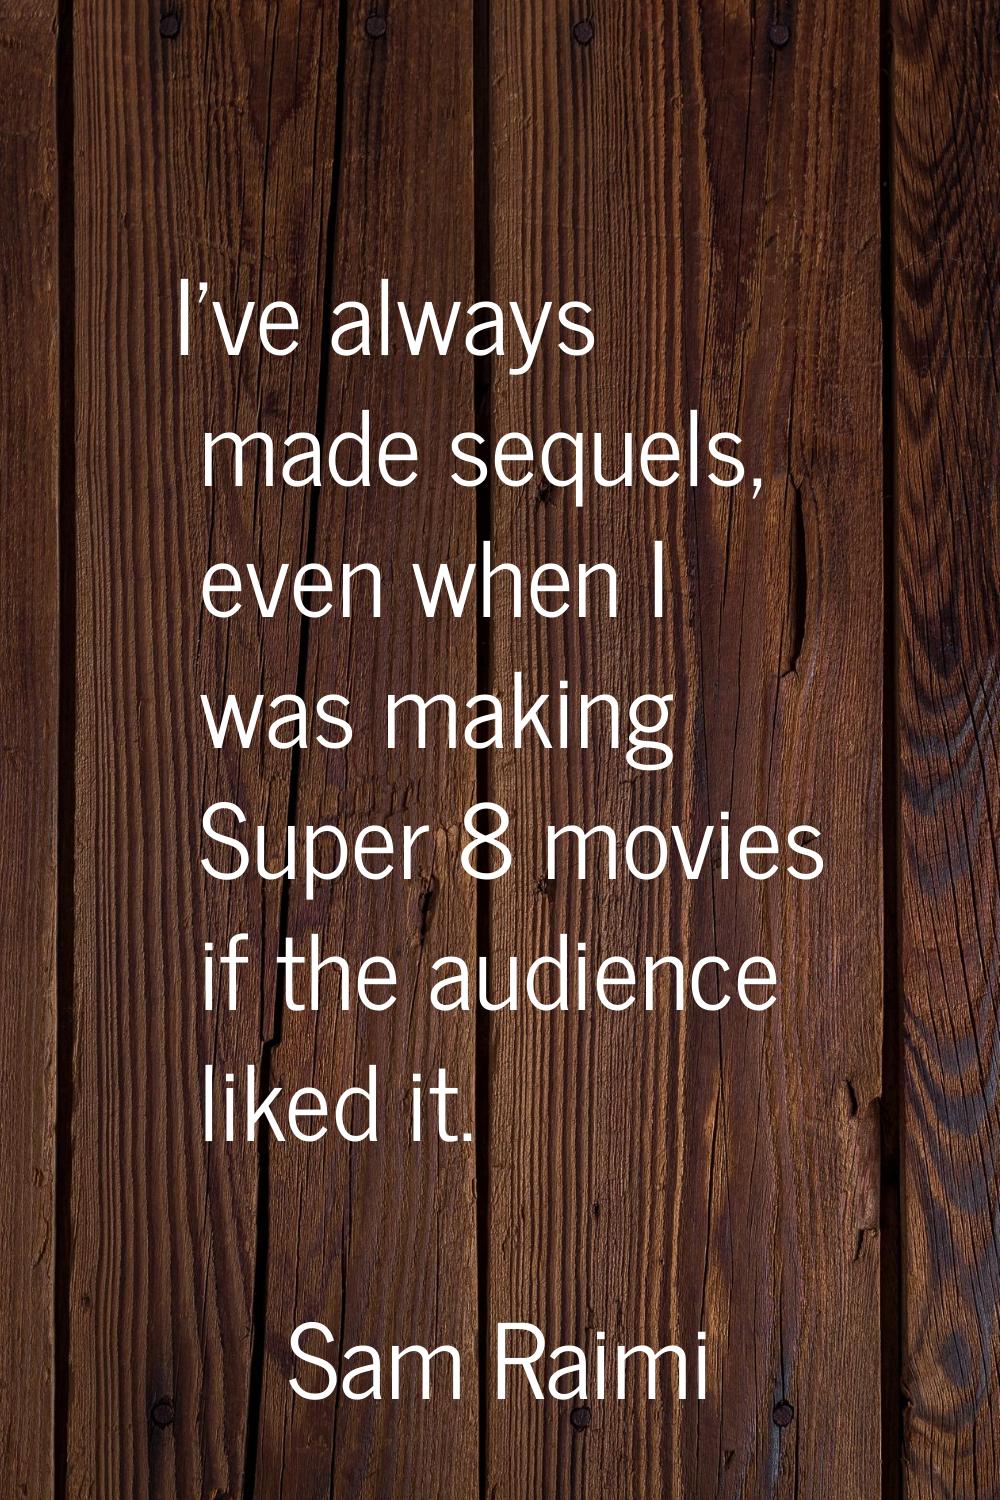 I've always made sequels, even when I was making Super 8 movies if the audience liked it.